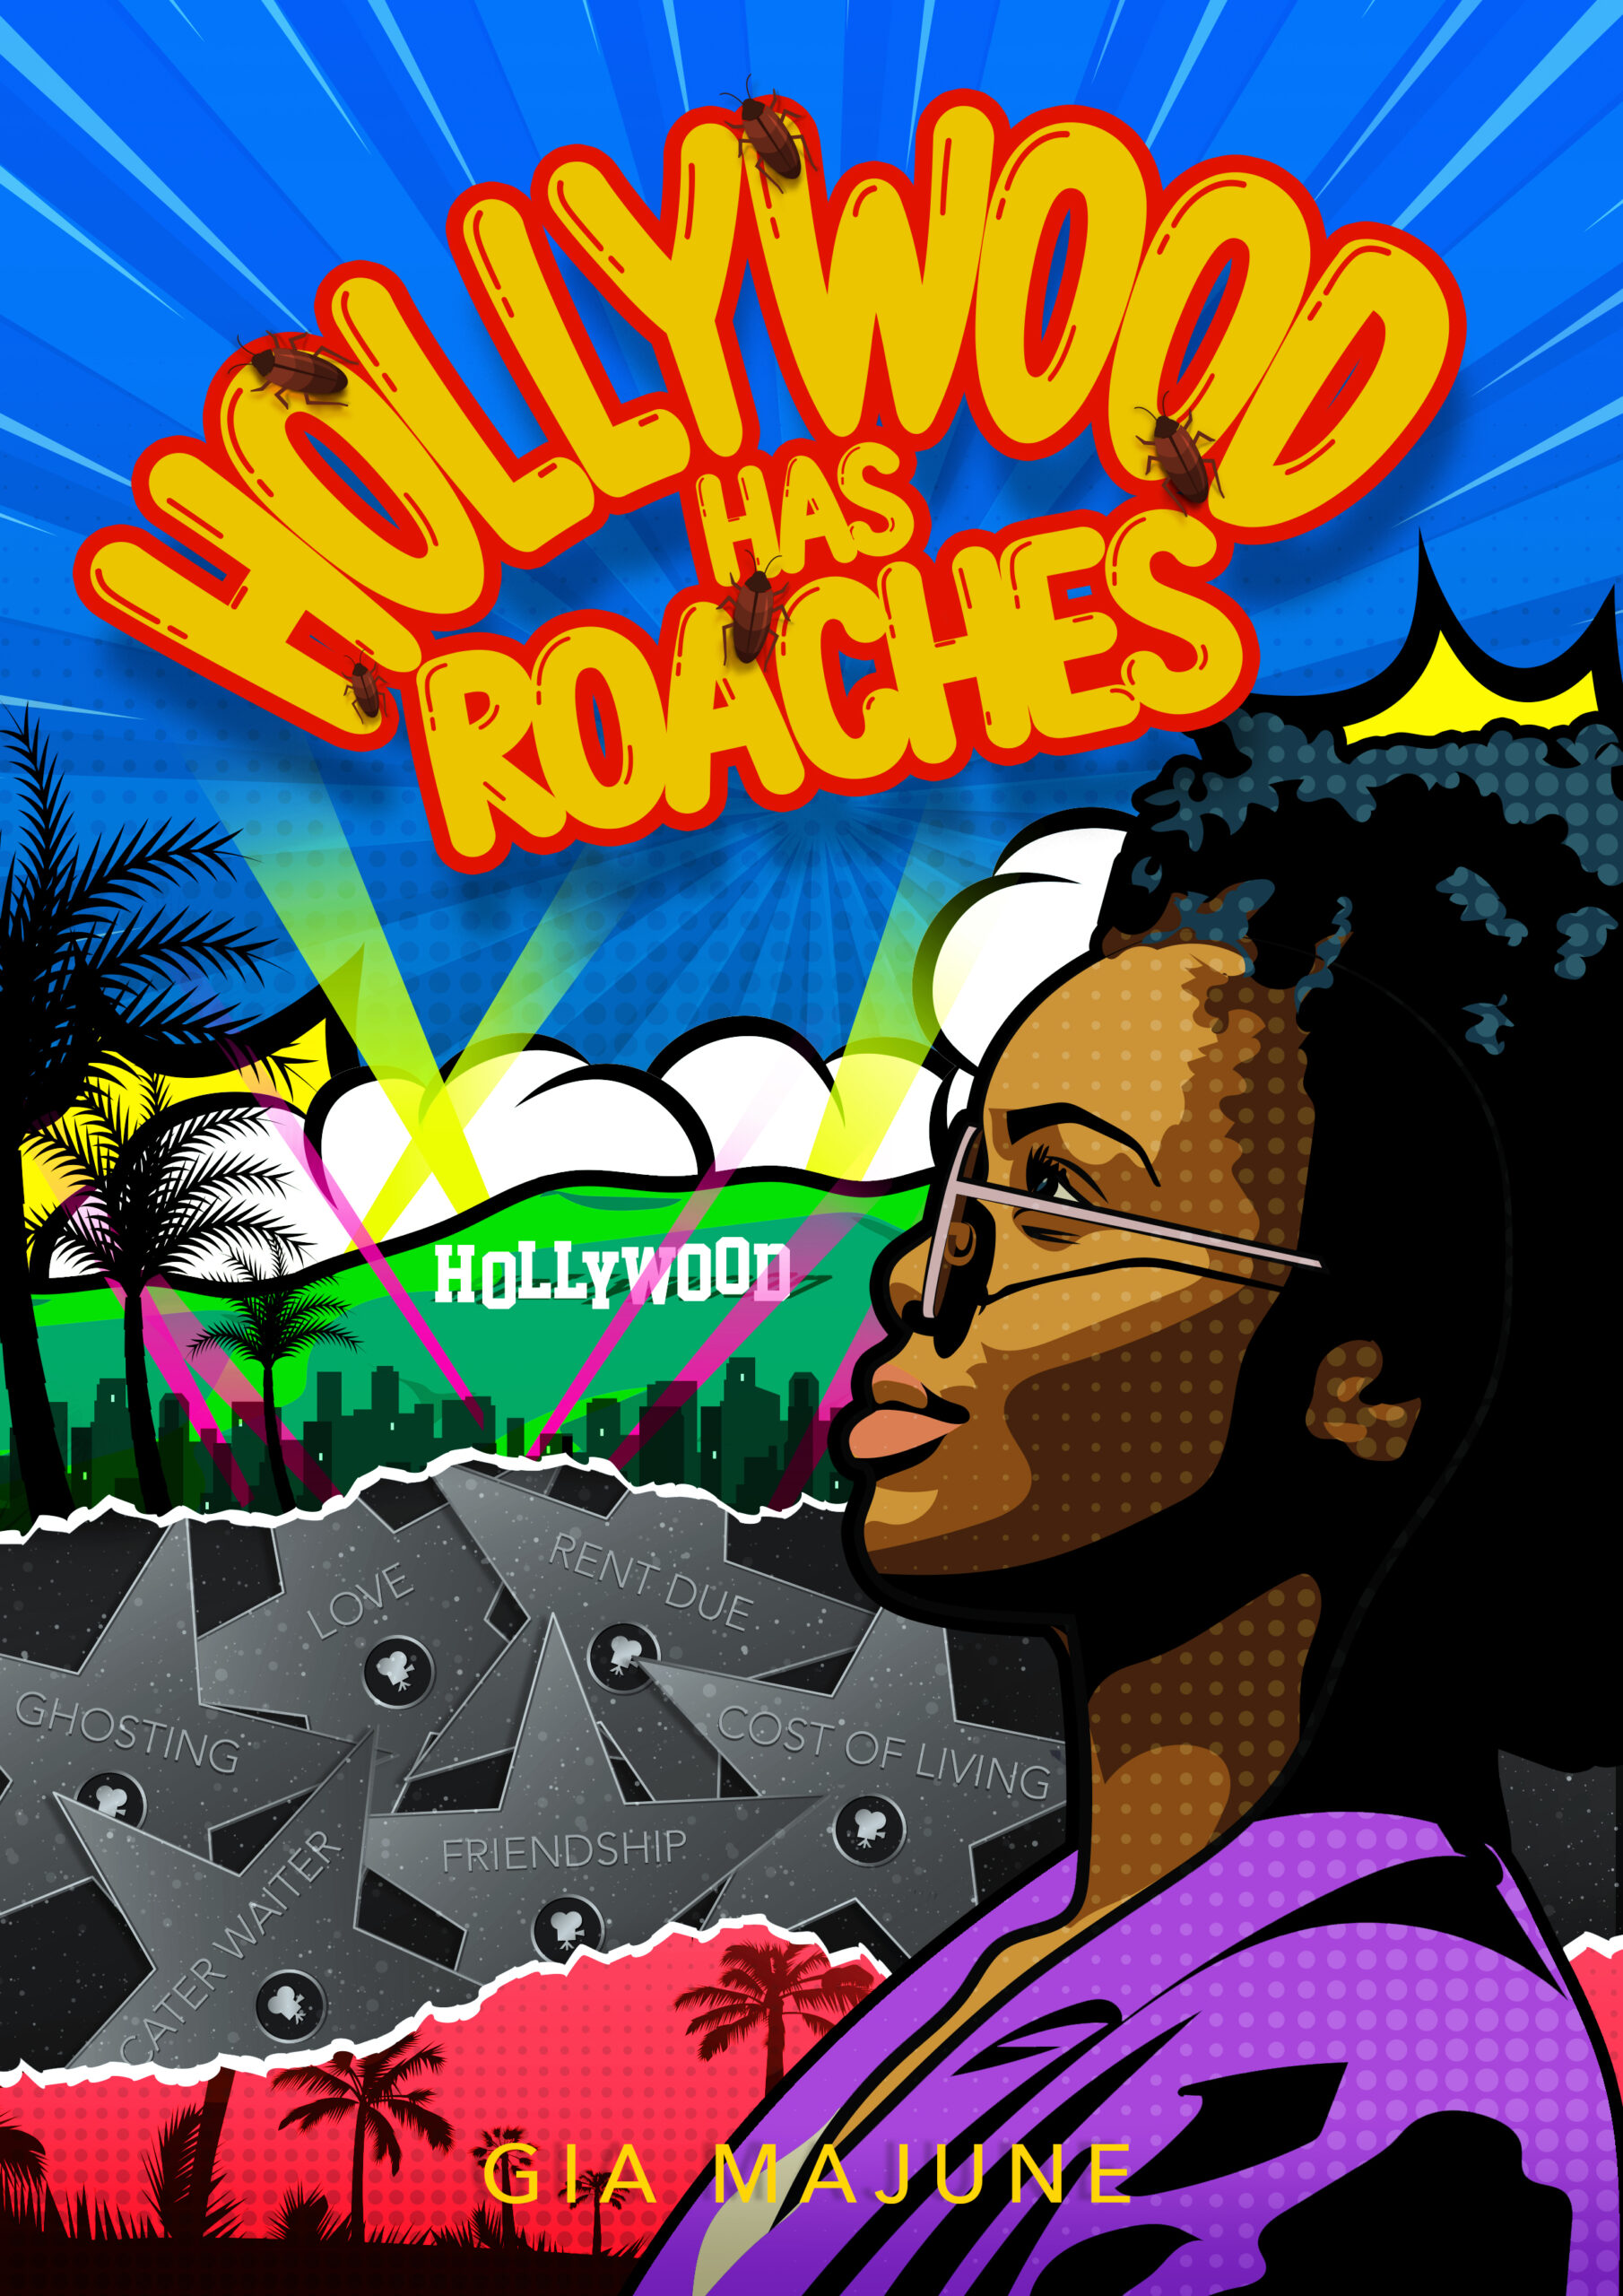 Book cover titled Hollywood Has Roaches